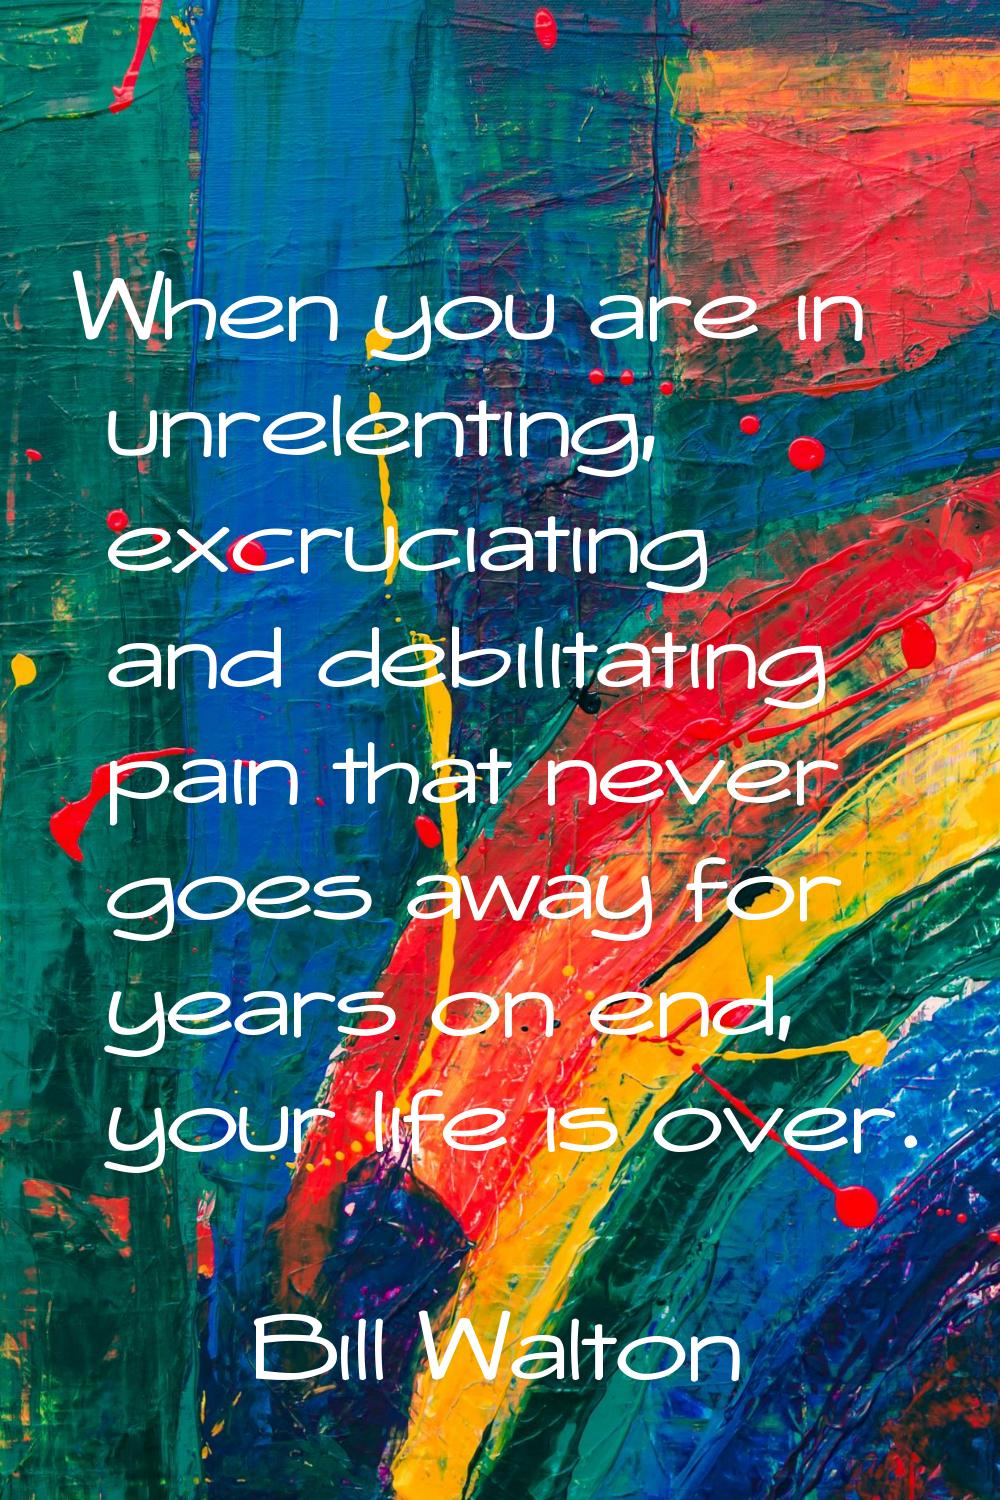 When you are in unrelenting, excruciating and debilitating pain that never goes away for years on e